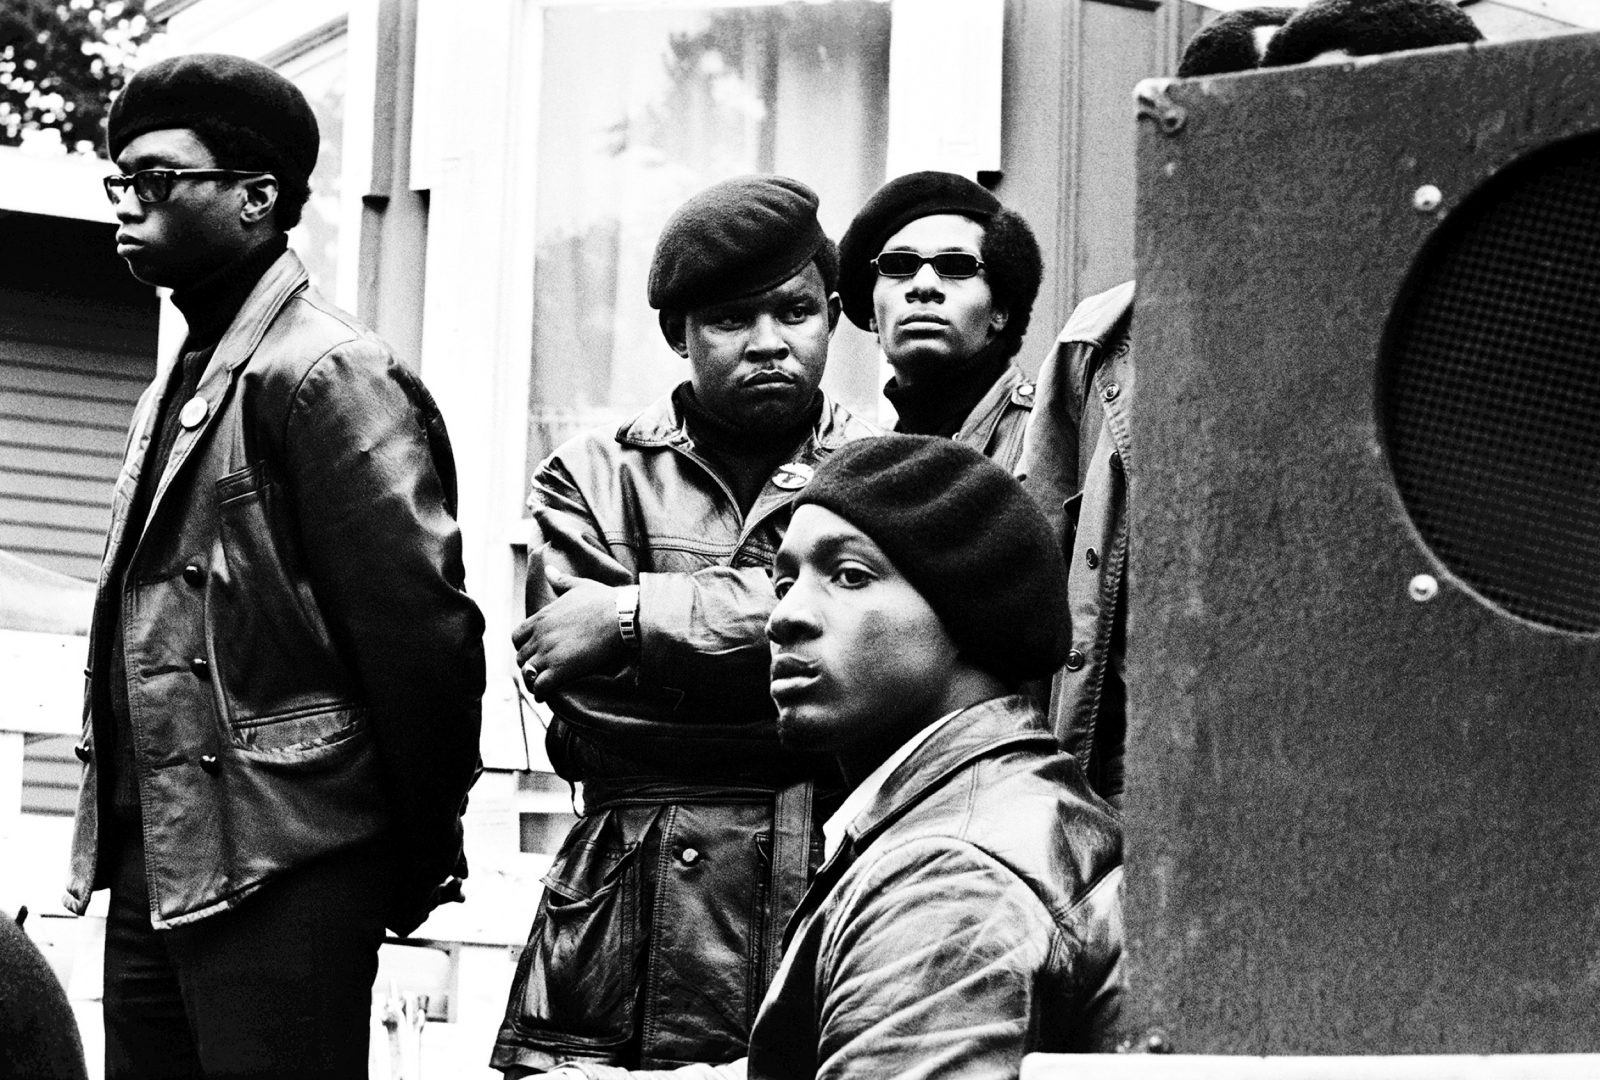 Panthers stand just off stage at a Free Huey rally in Defermery Park. Cle Brooks (arms folded). Cle was a San Francisco Panther who went to San Quentin Prison and started the San Quentin chapter of the BPP. 1968